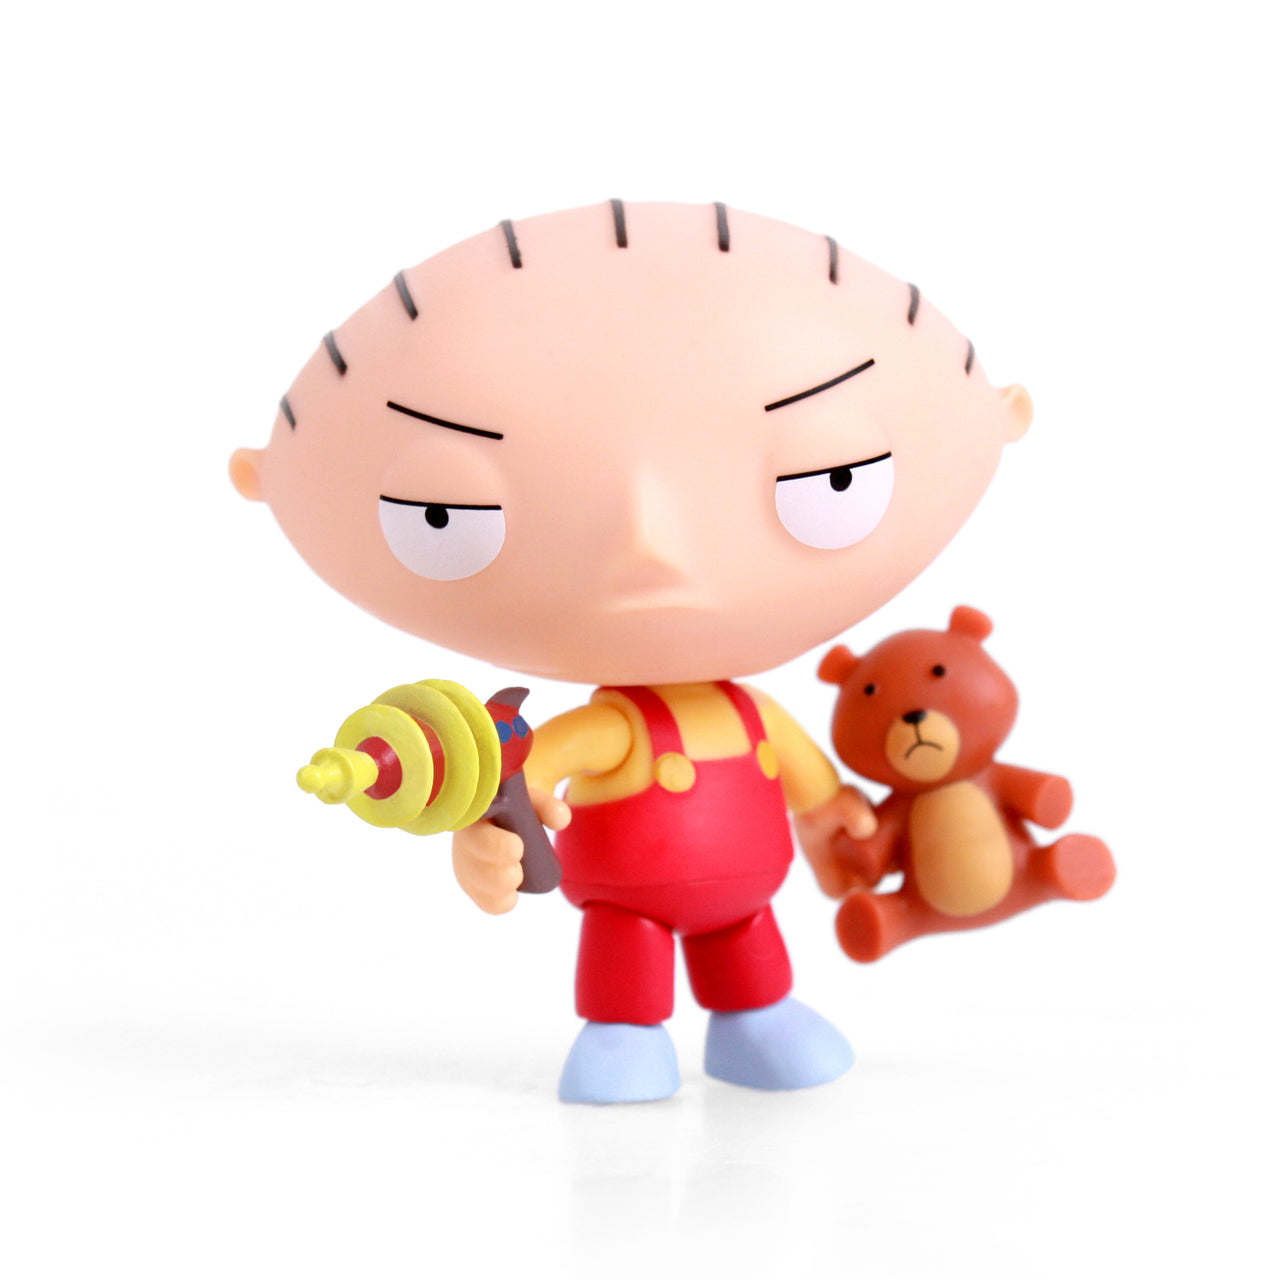 The Loyal Subjects - Family Guy Stewie Griffin with Ray Gun & Rupert